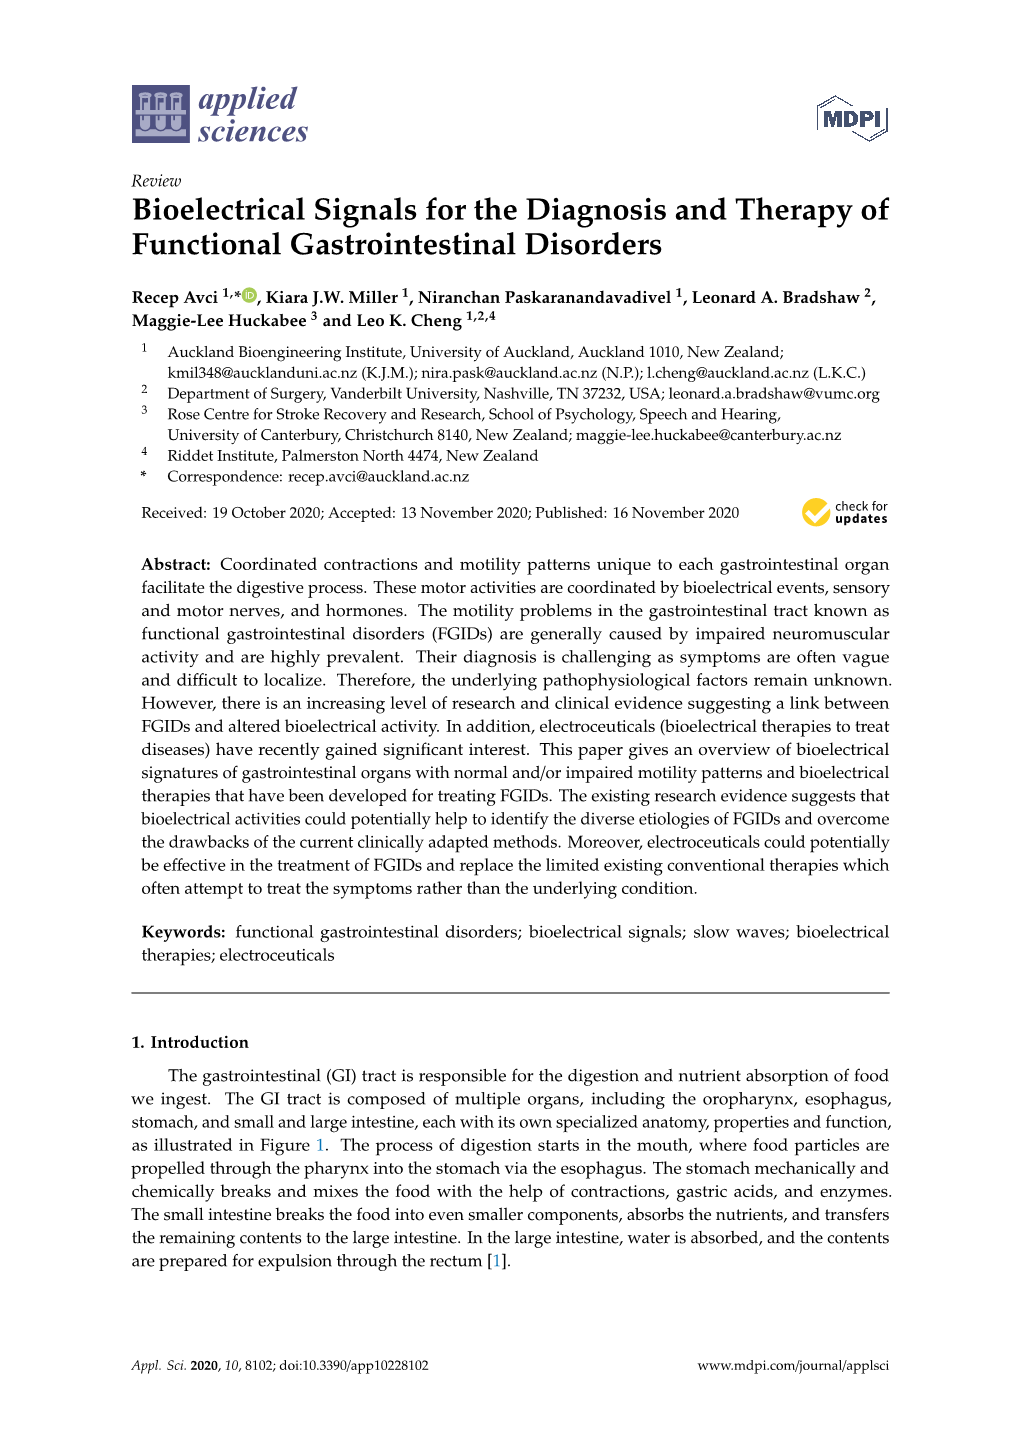 Bioelectrical Signals for the Diagnosis and Therapy of Functional Gastrointestinal Disorders